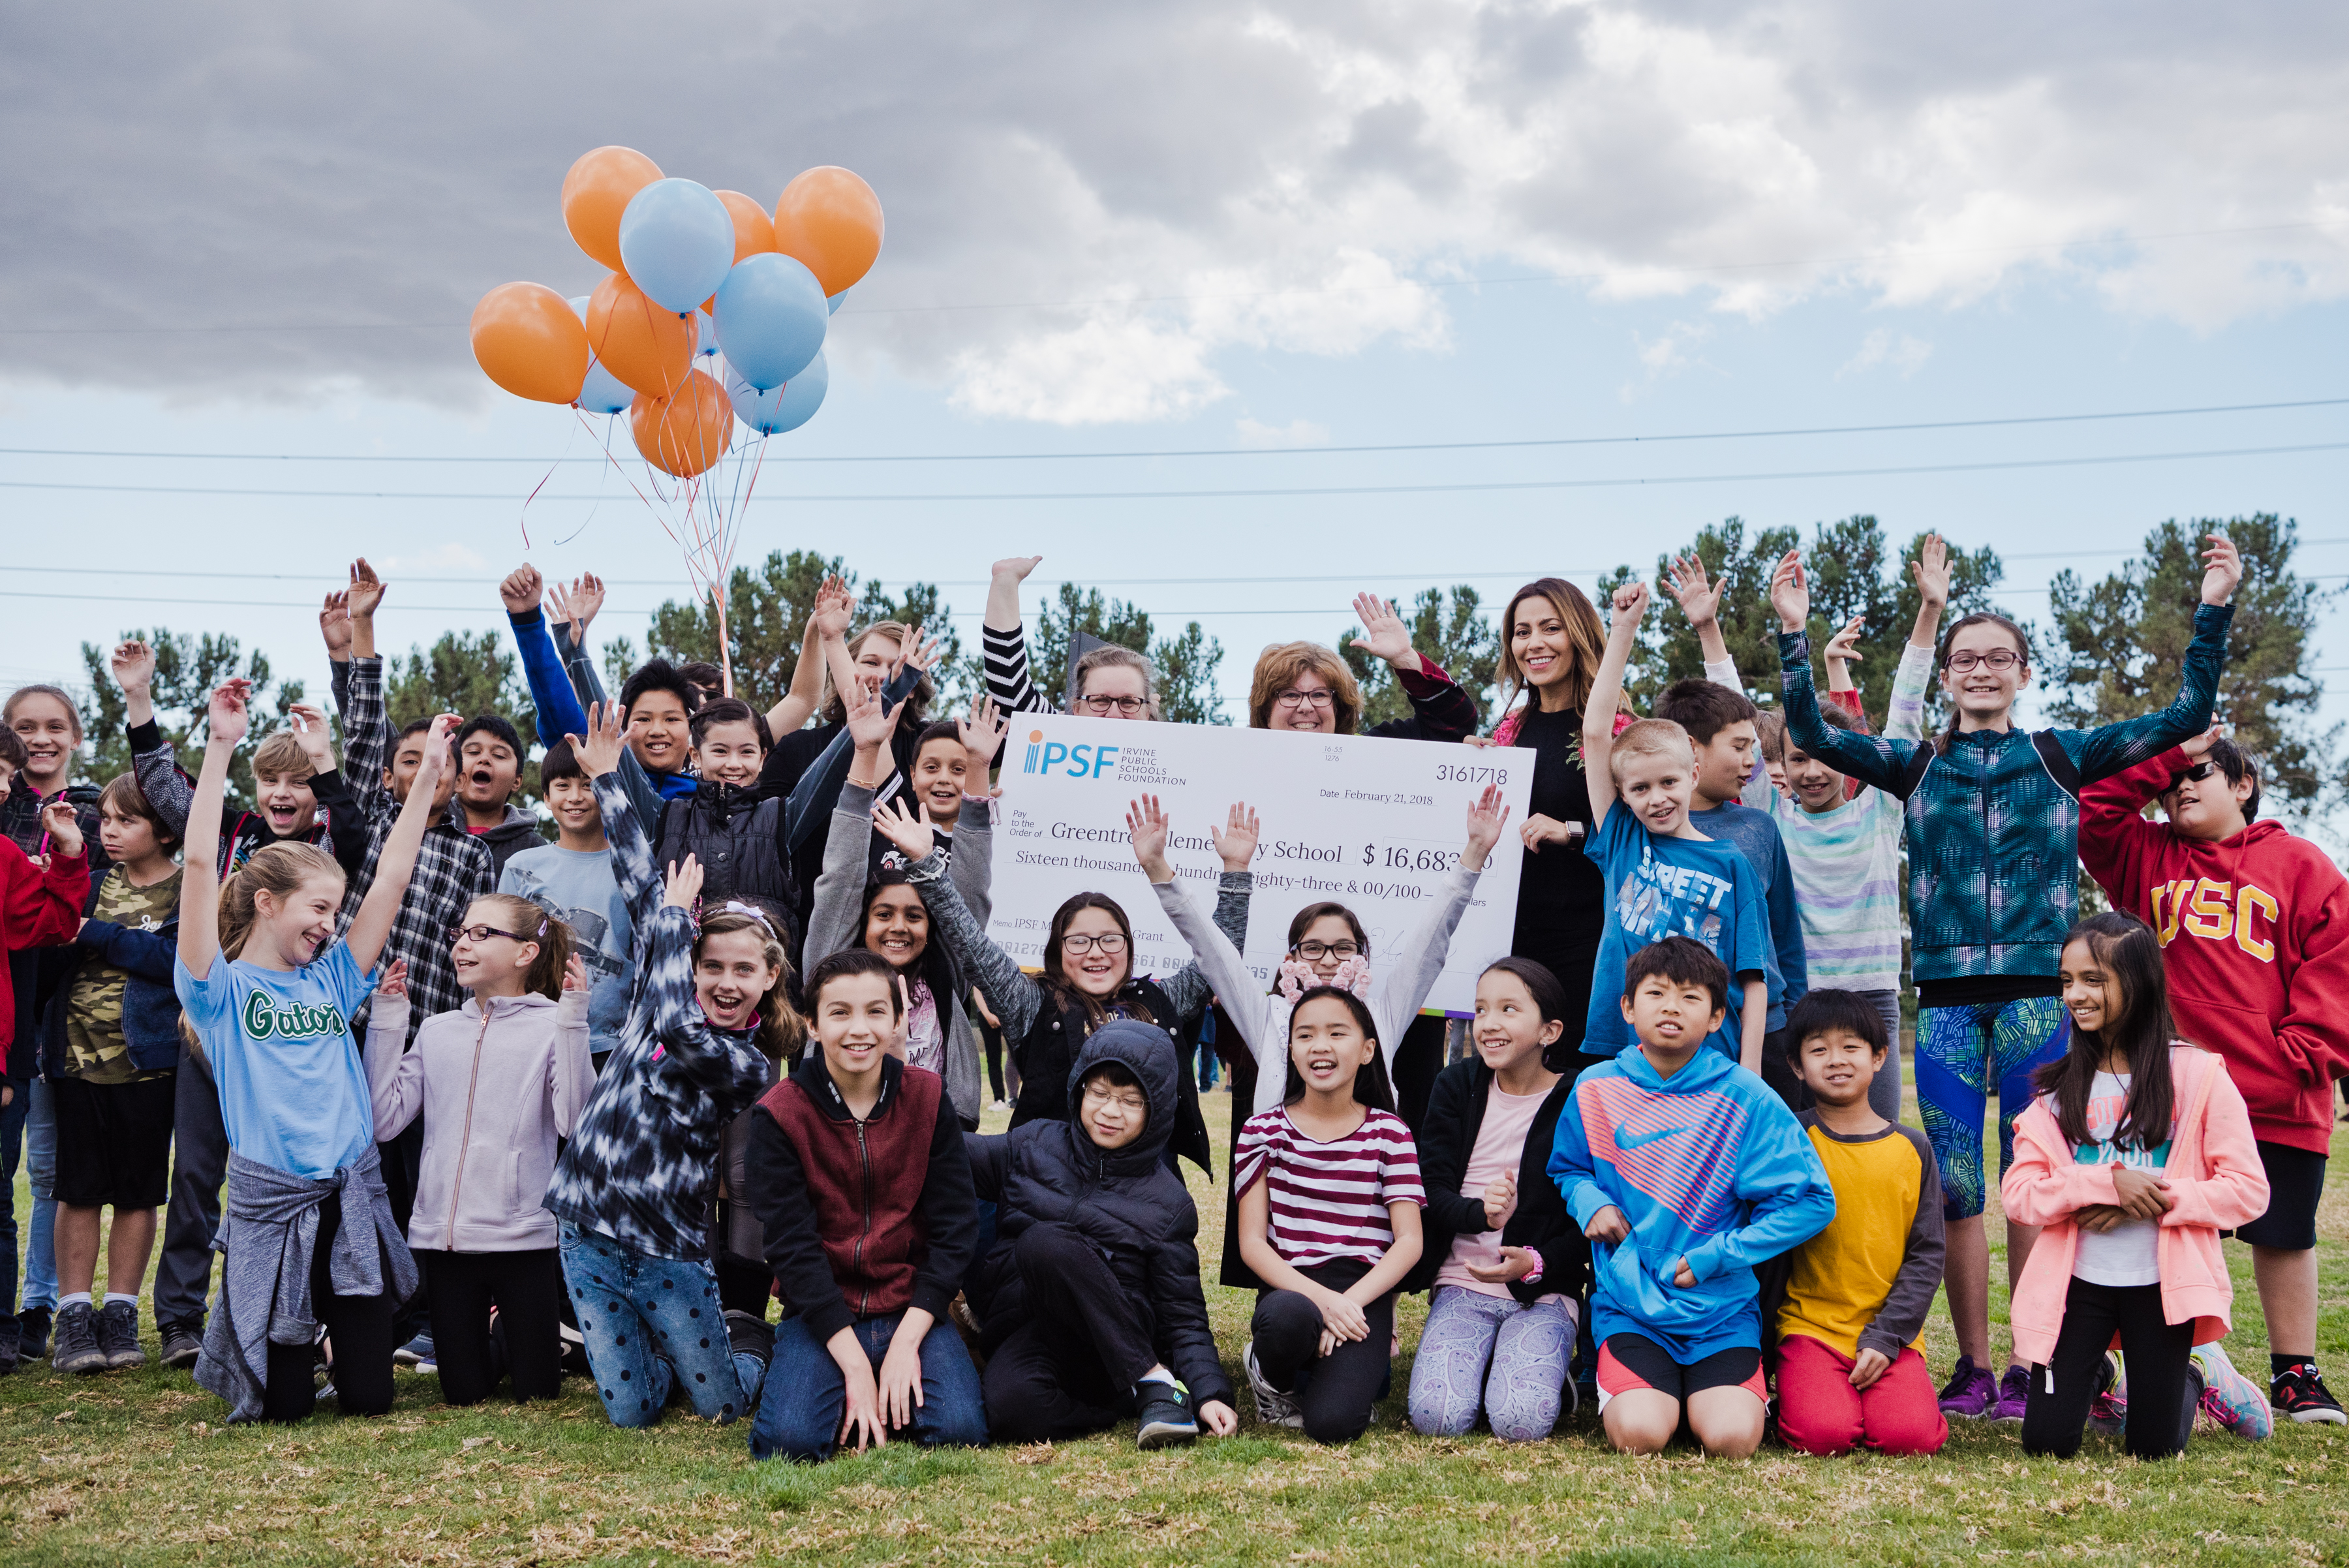 During a school fire drill, IPSF surprised Tamara Brown, Stephanie Frazier, and Patricia Hanes of Greentree Elementary School with a Mega Innovation Grant for their program, Project SOAR. Photos Courtesy of Lisa Hu Chen